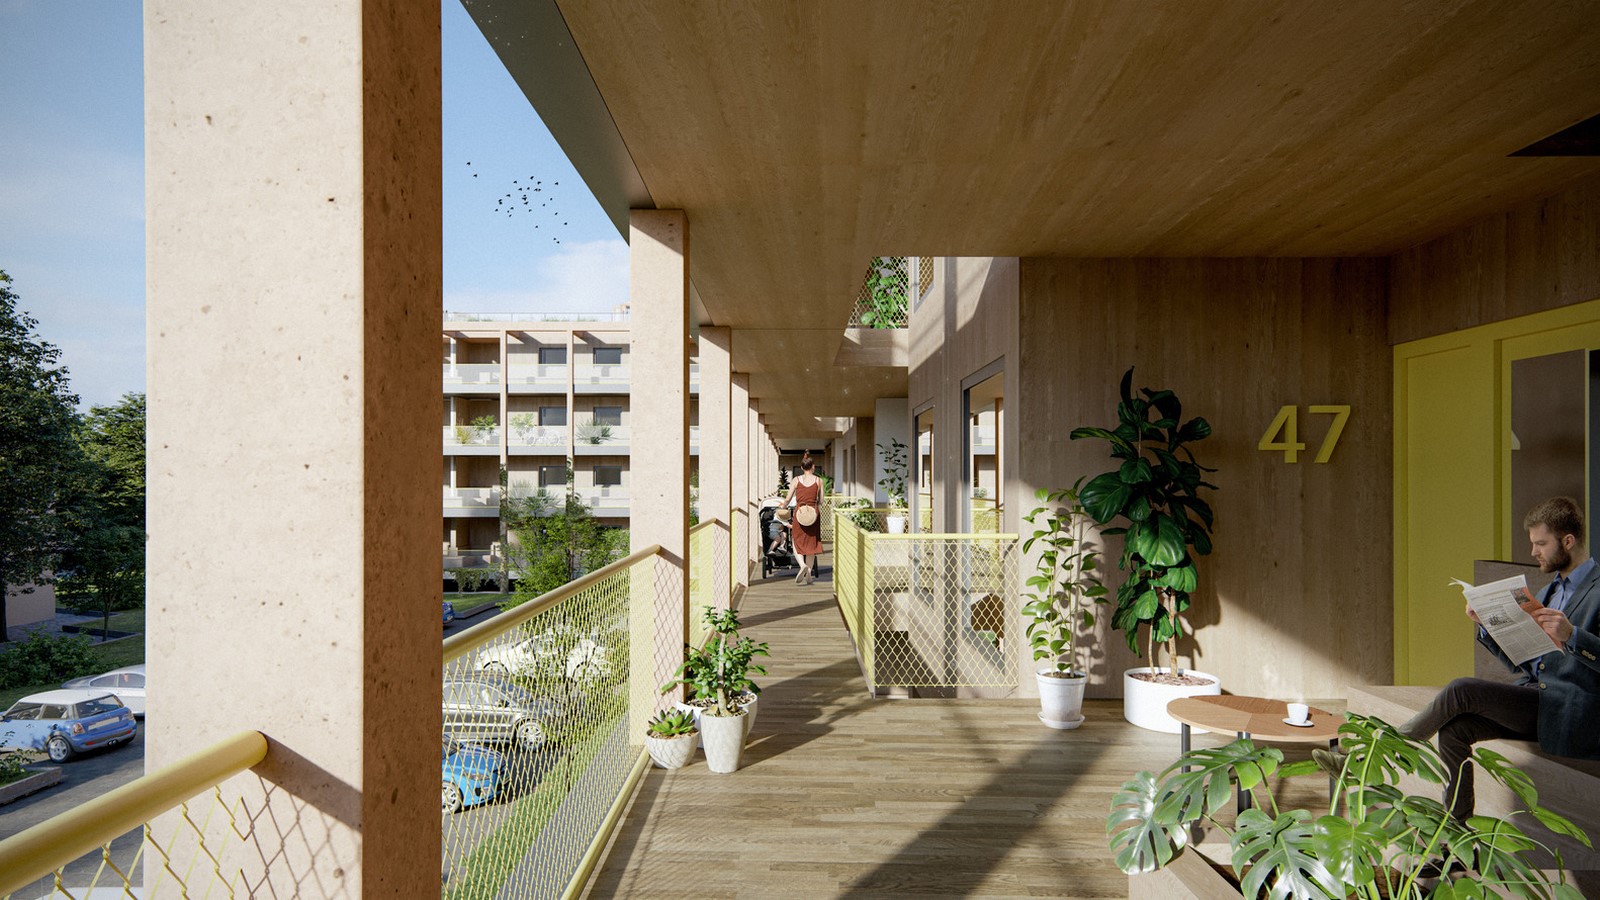 Modular timber system to create Affordable housing in Rotterdam - Sheet6